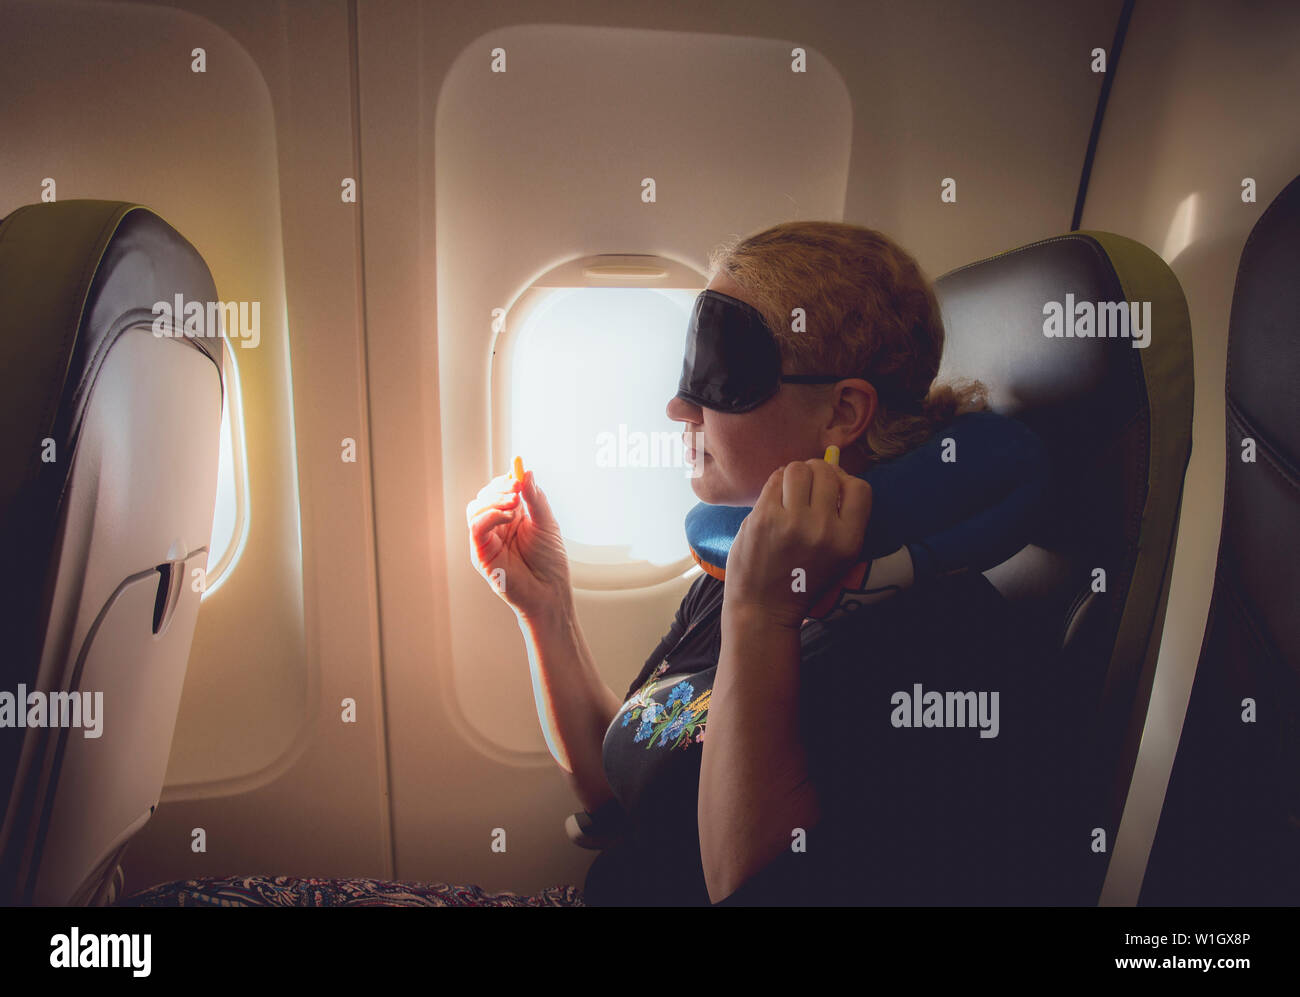 33 year old woman using traveling pillow, sleeping mask and ear plugs in plane cabin on passenger seat, fly with airplane, comfortable cozy traveling Stock Photo